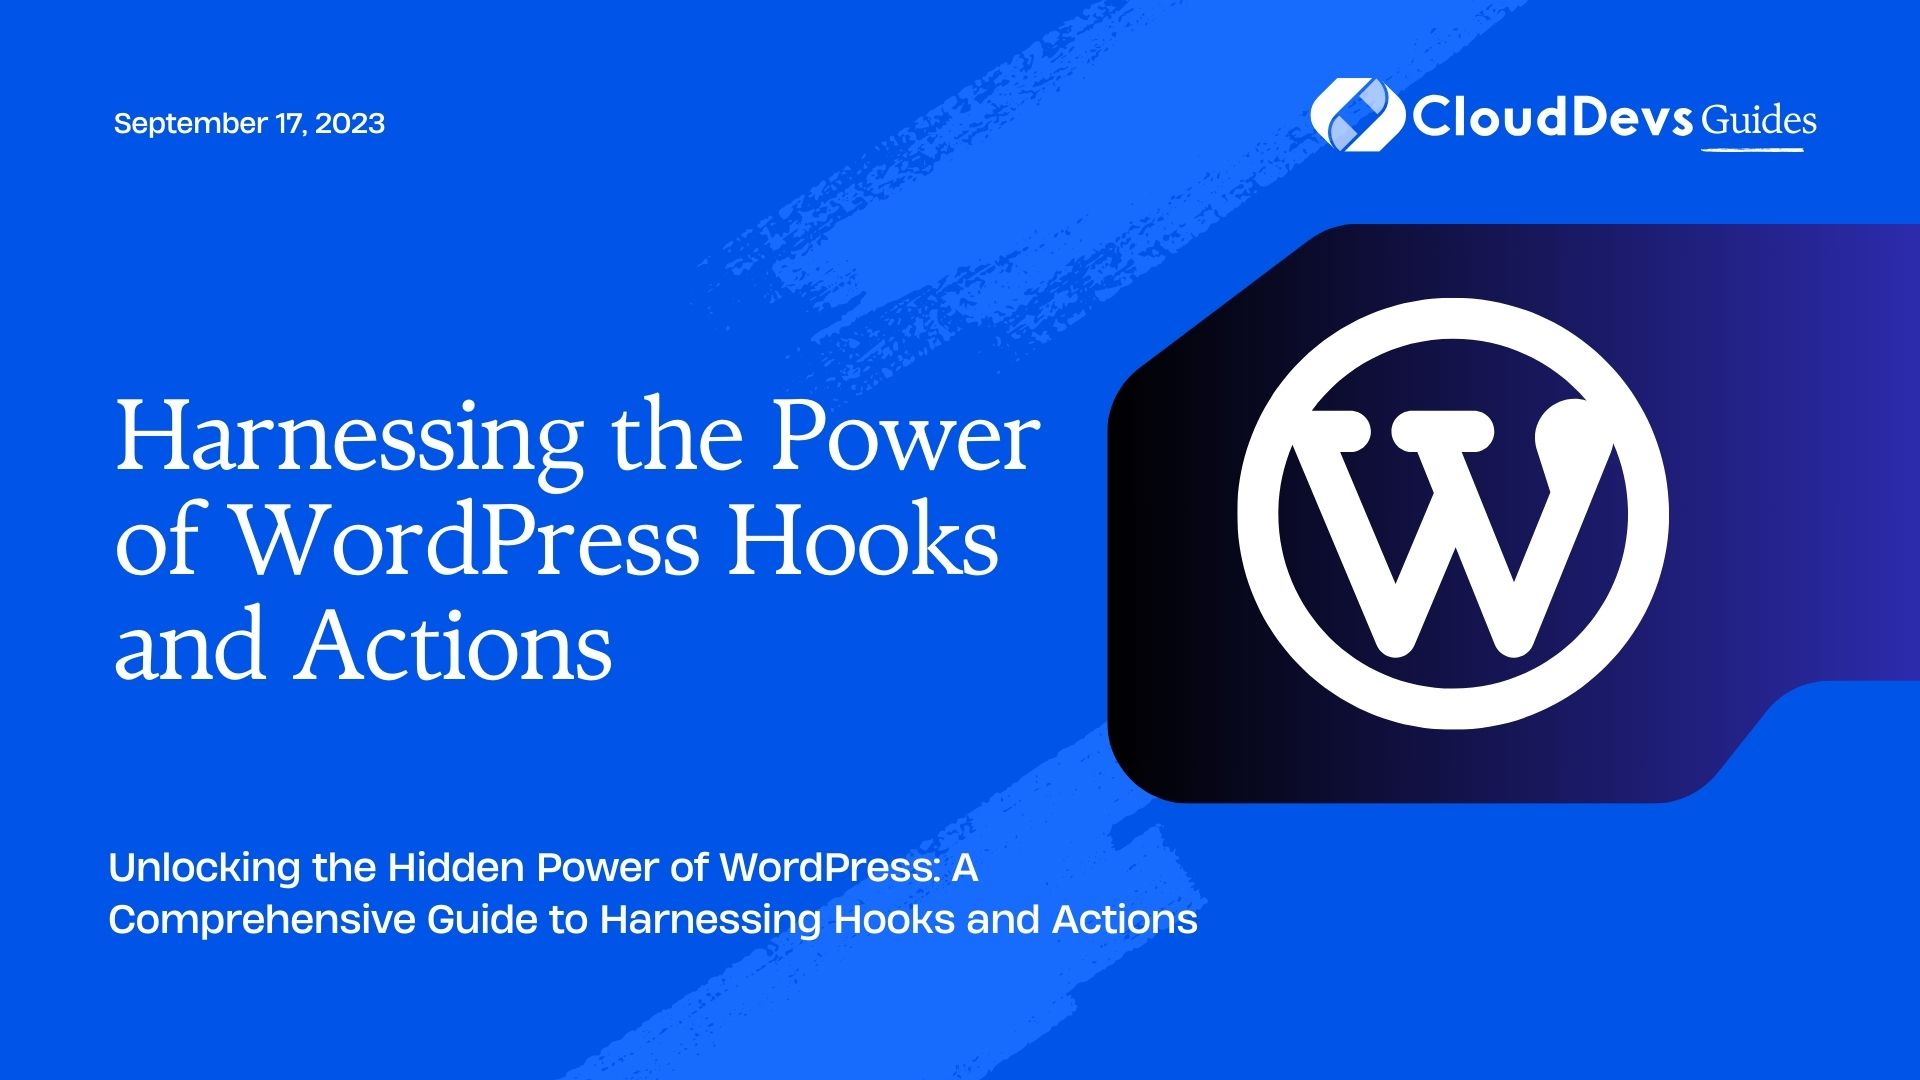 Harnessing the Power of WordPress Hooks and Actions